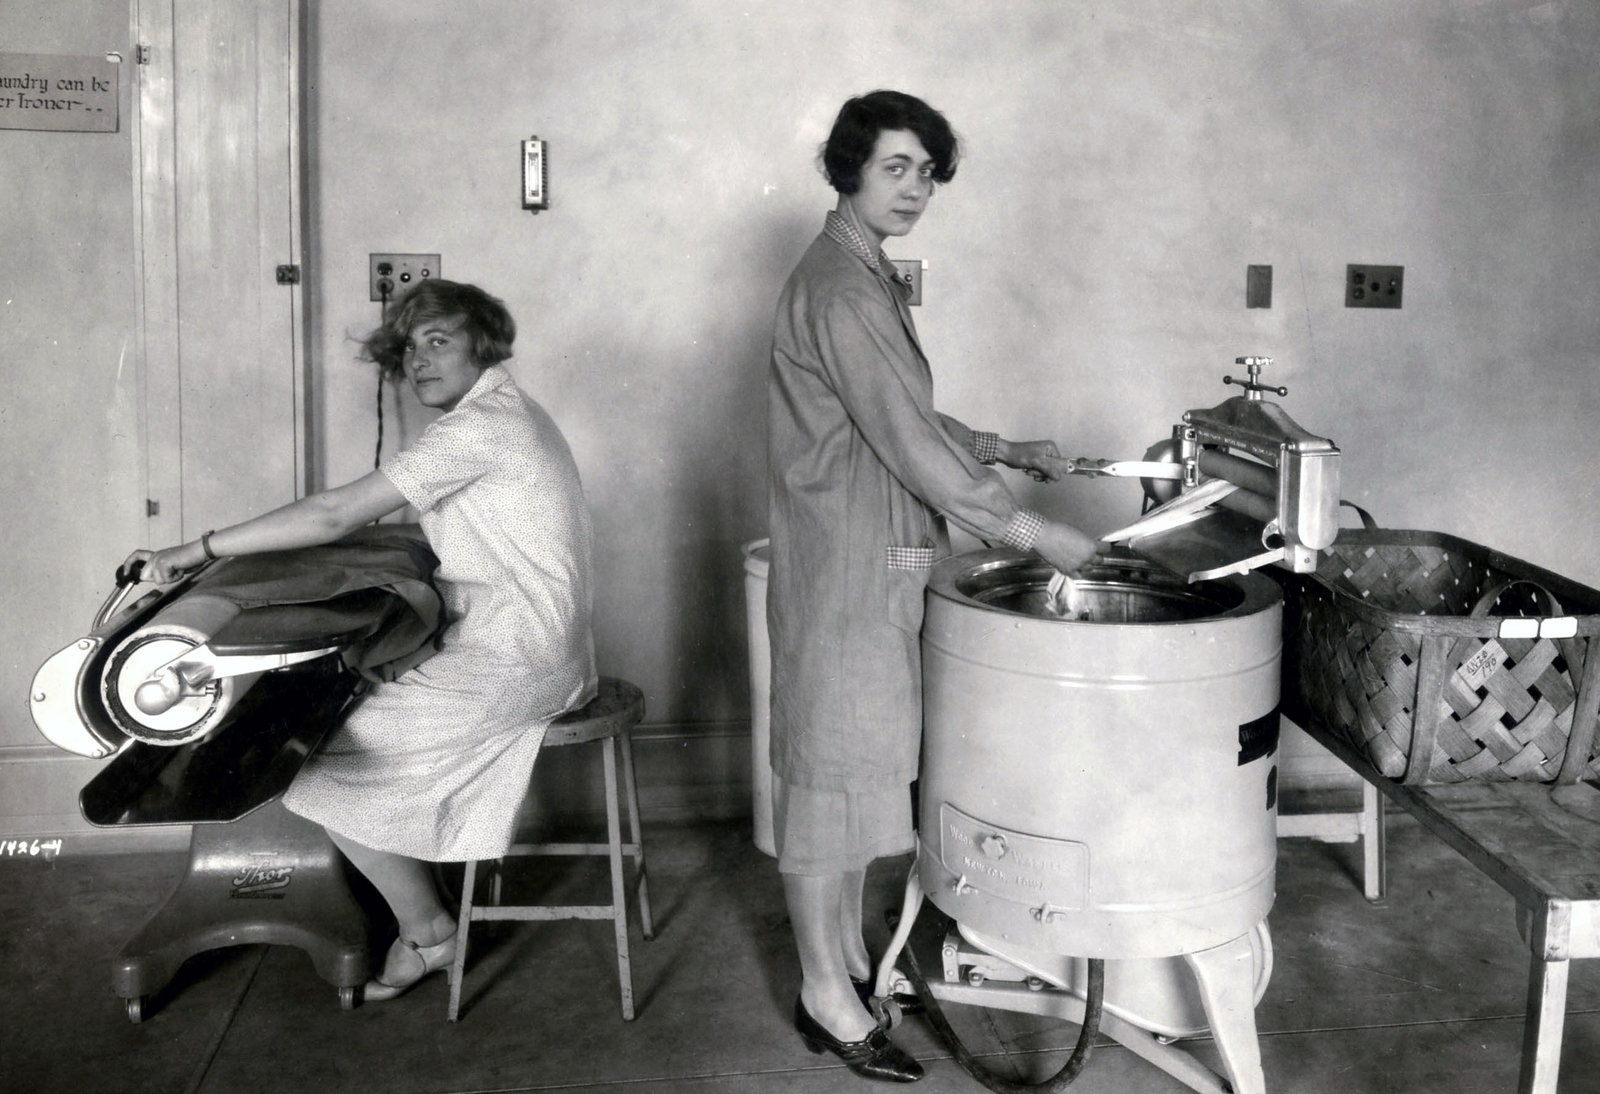 Women washing and ironing clothing in the 1920s